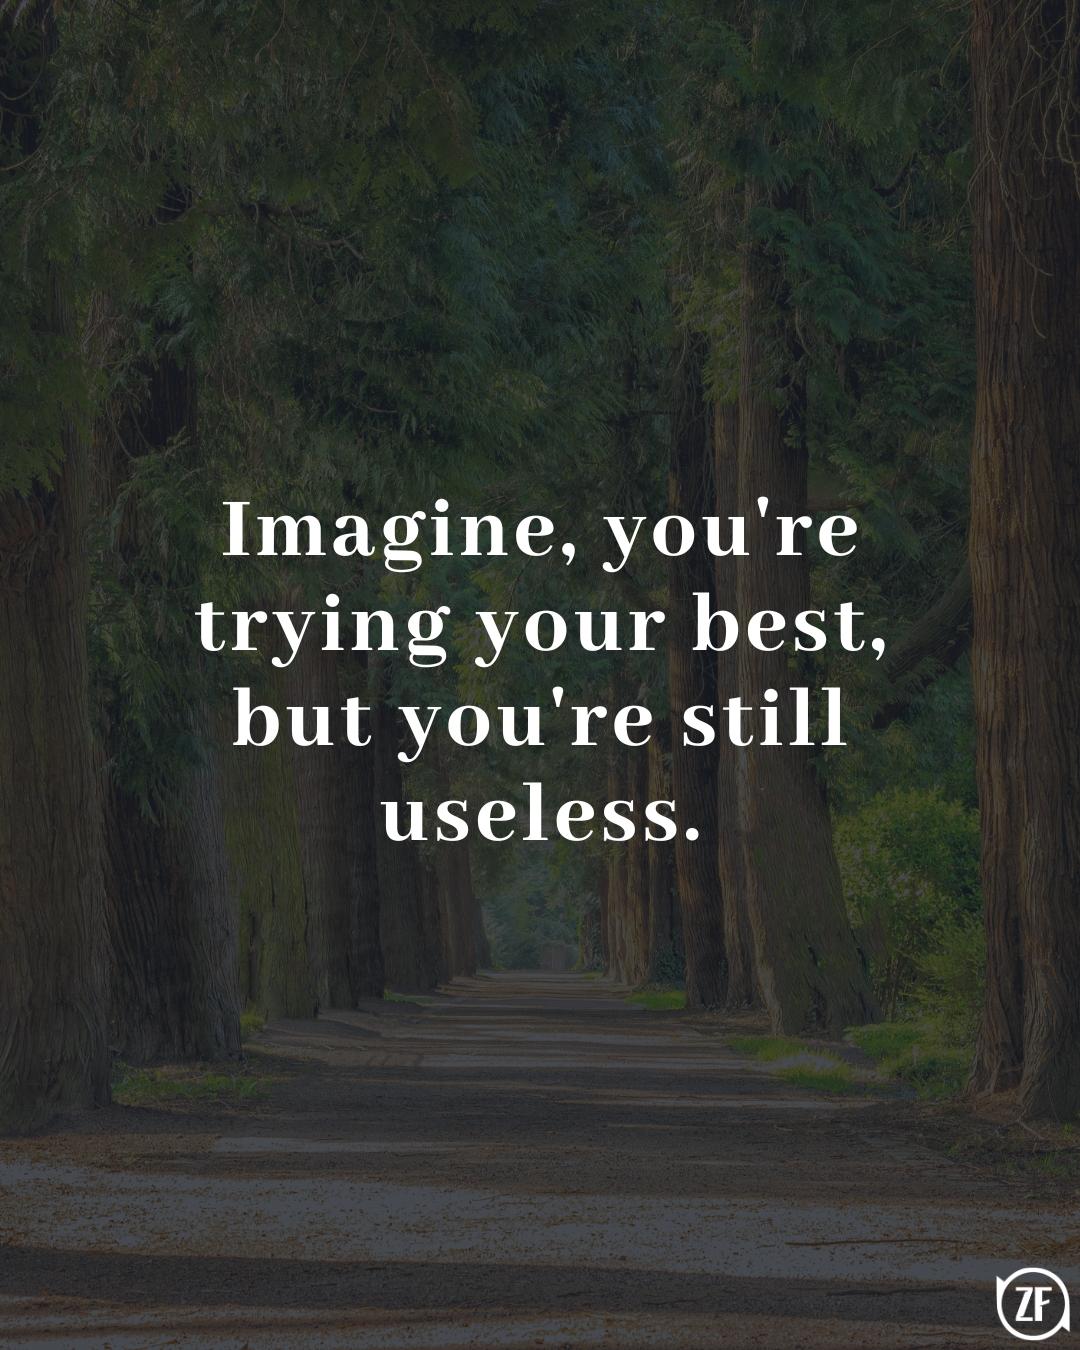 Imagine, you're trying your best, but you're still useless.